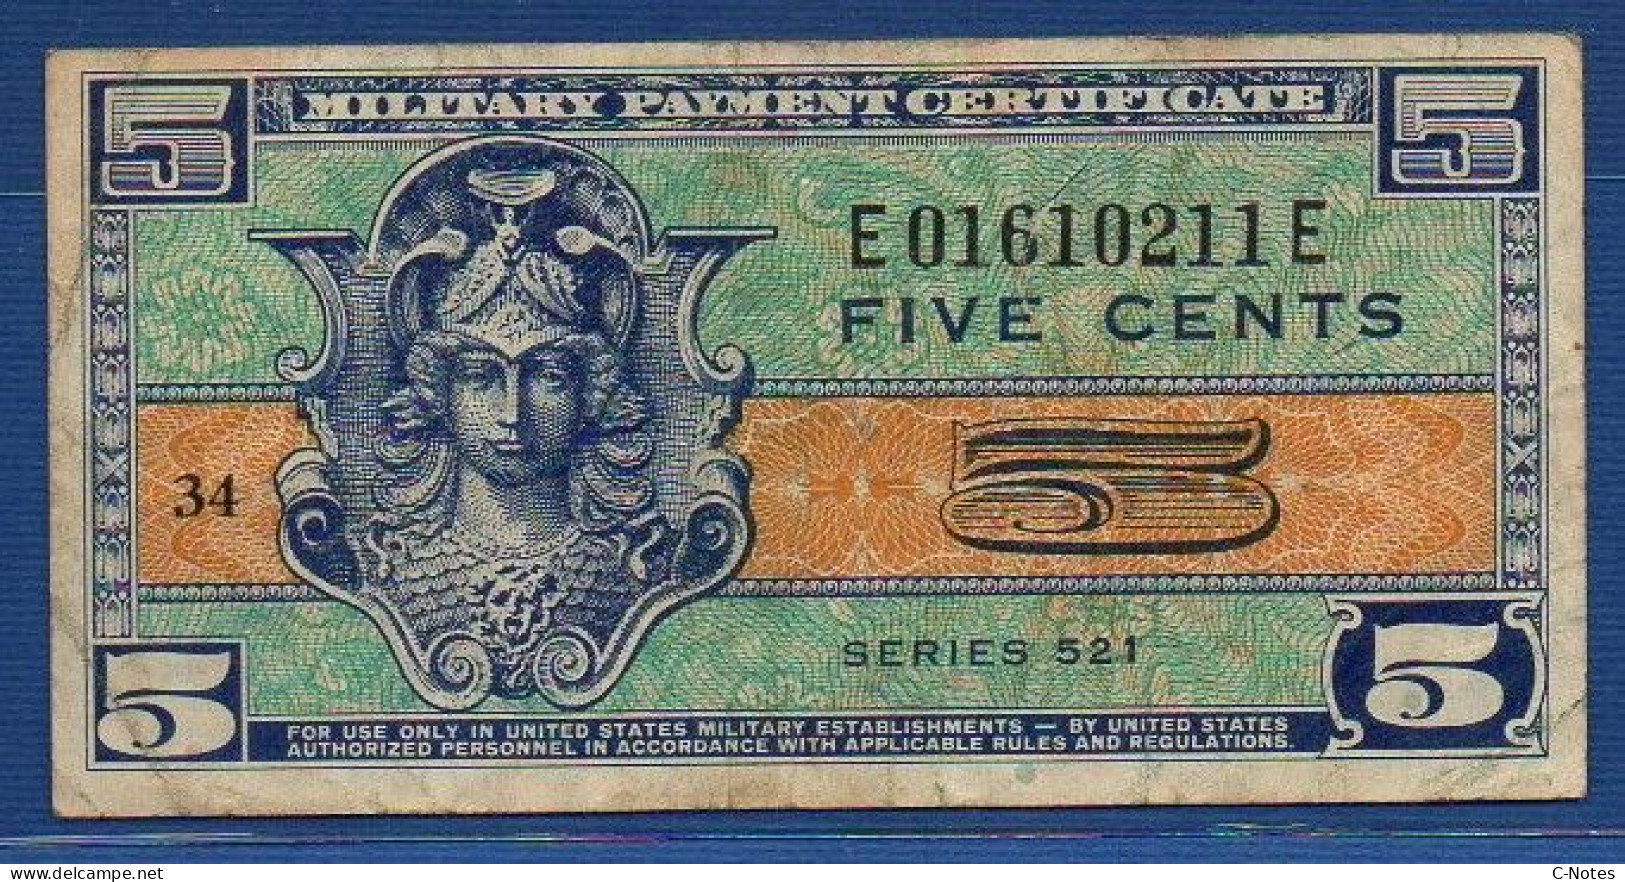 UNITED STATES OF AMERICA - P.M29 – 5 Cents 1954 Circulated, S/n E01610211E - 1954-1958 - Reeksen 521